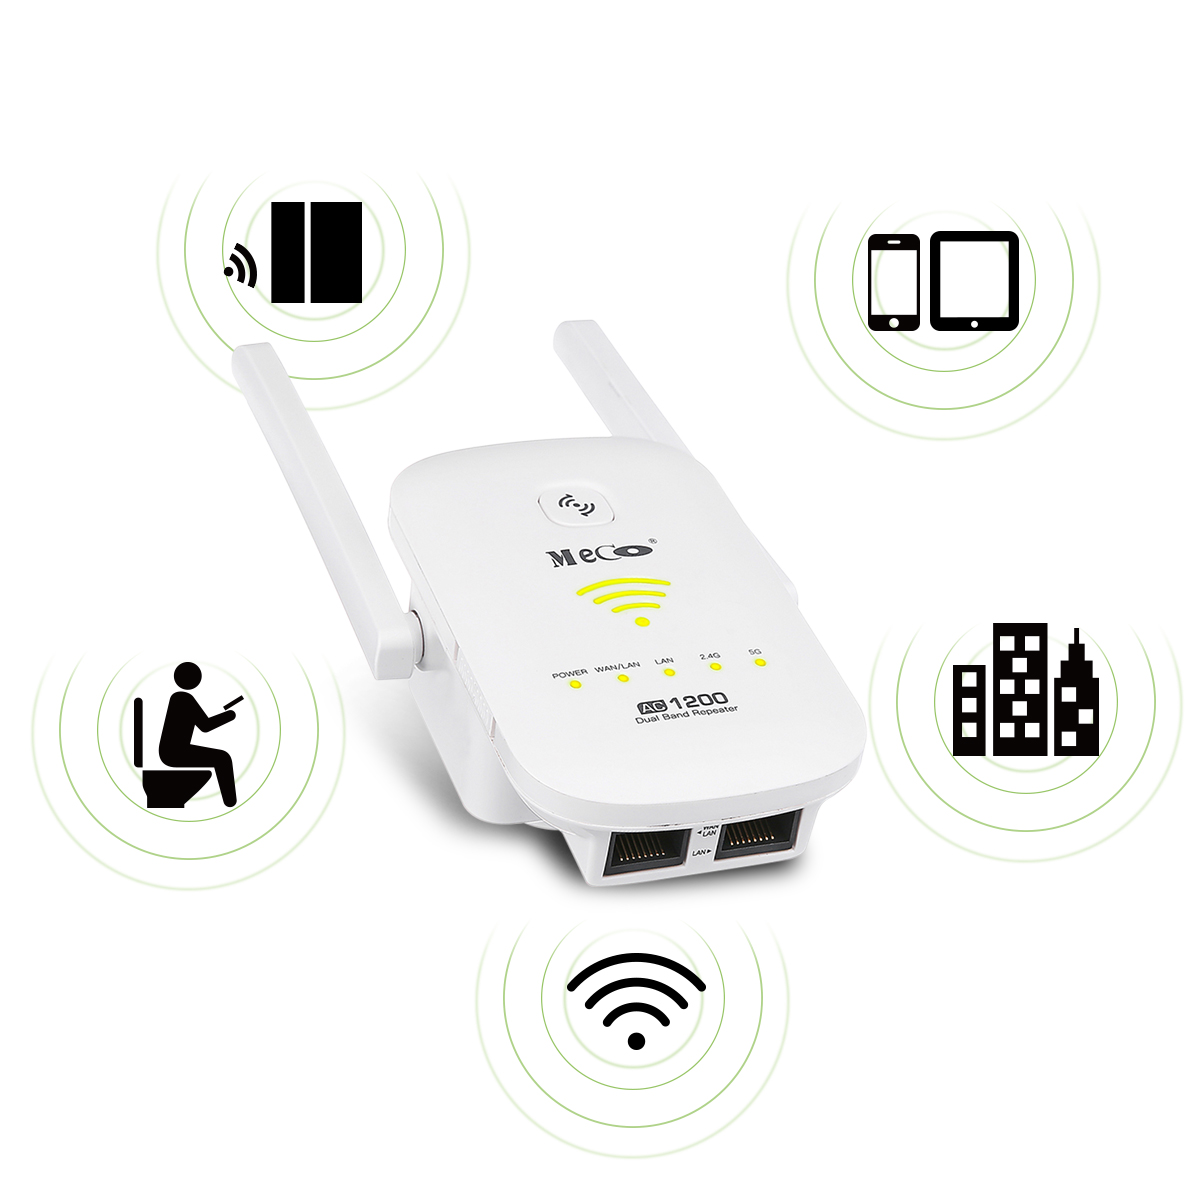 Find MECO ELEVERDE AC1200 WiFi Repeater Dual Band 2 4G 5G 1200M Repeater/Router/AP Mode Switch WPS WiFi Range Extender WiFi Wireless Amplifier ME AC50 for Sale on Gipsybee.com with cryptocurrencies